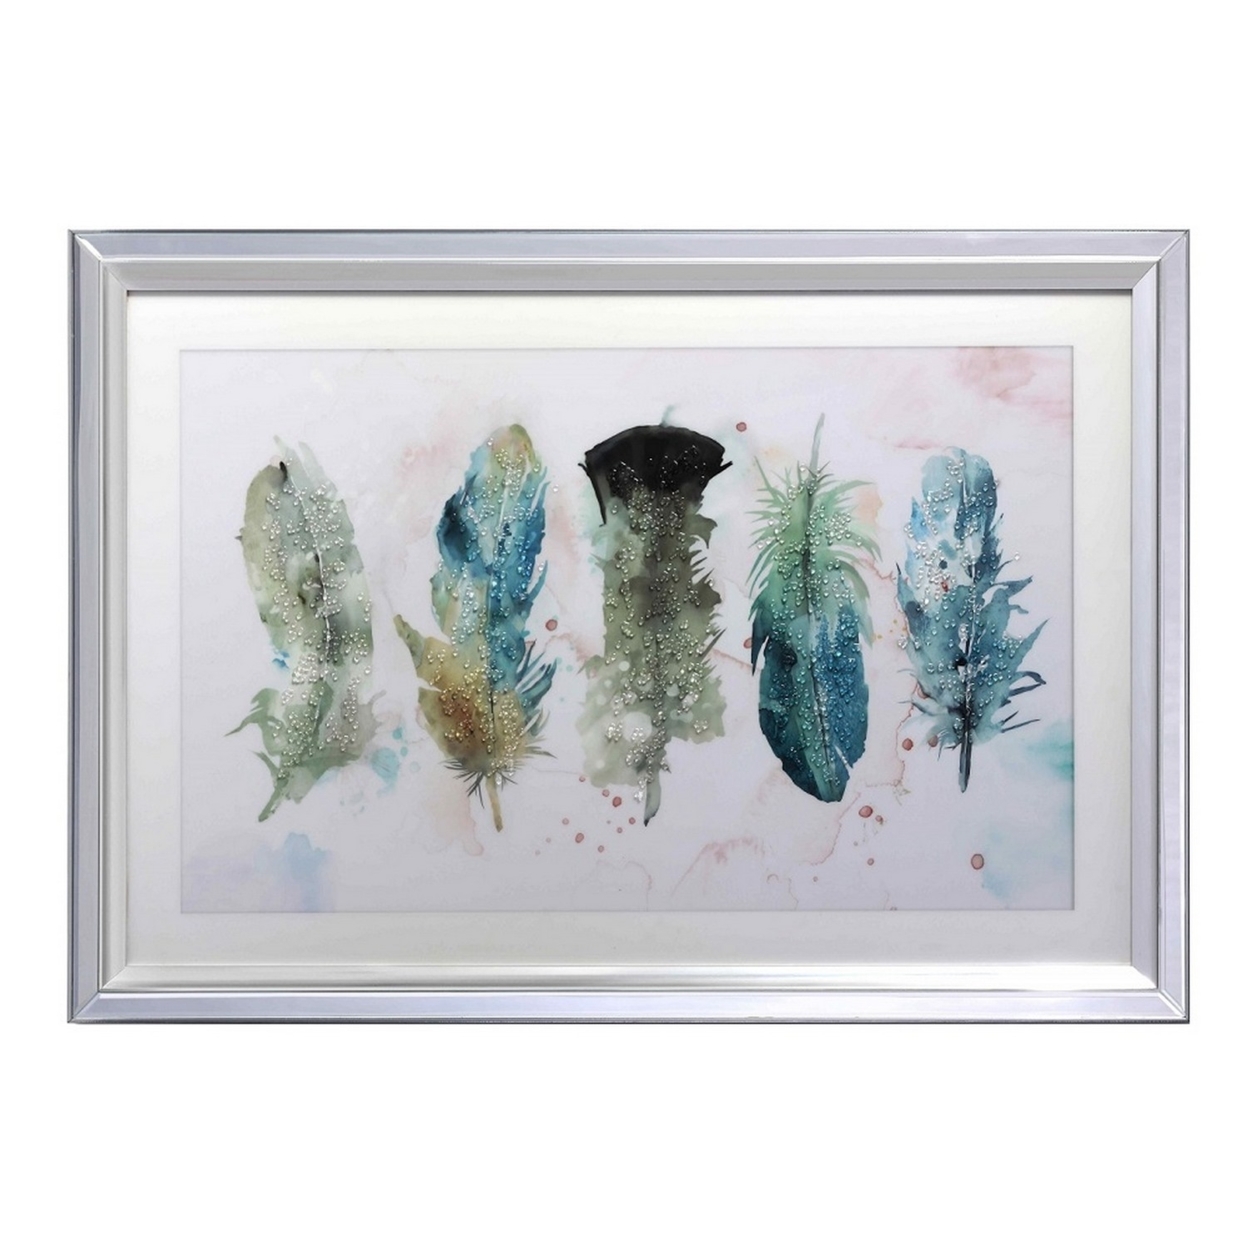 Wall Art With Painted Feathers And Acrylic Mirror Frame, Silver And Gray- Saltoro Sherpi